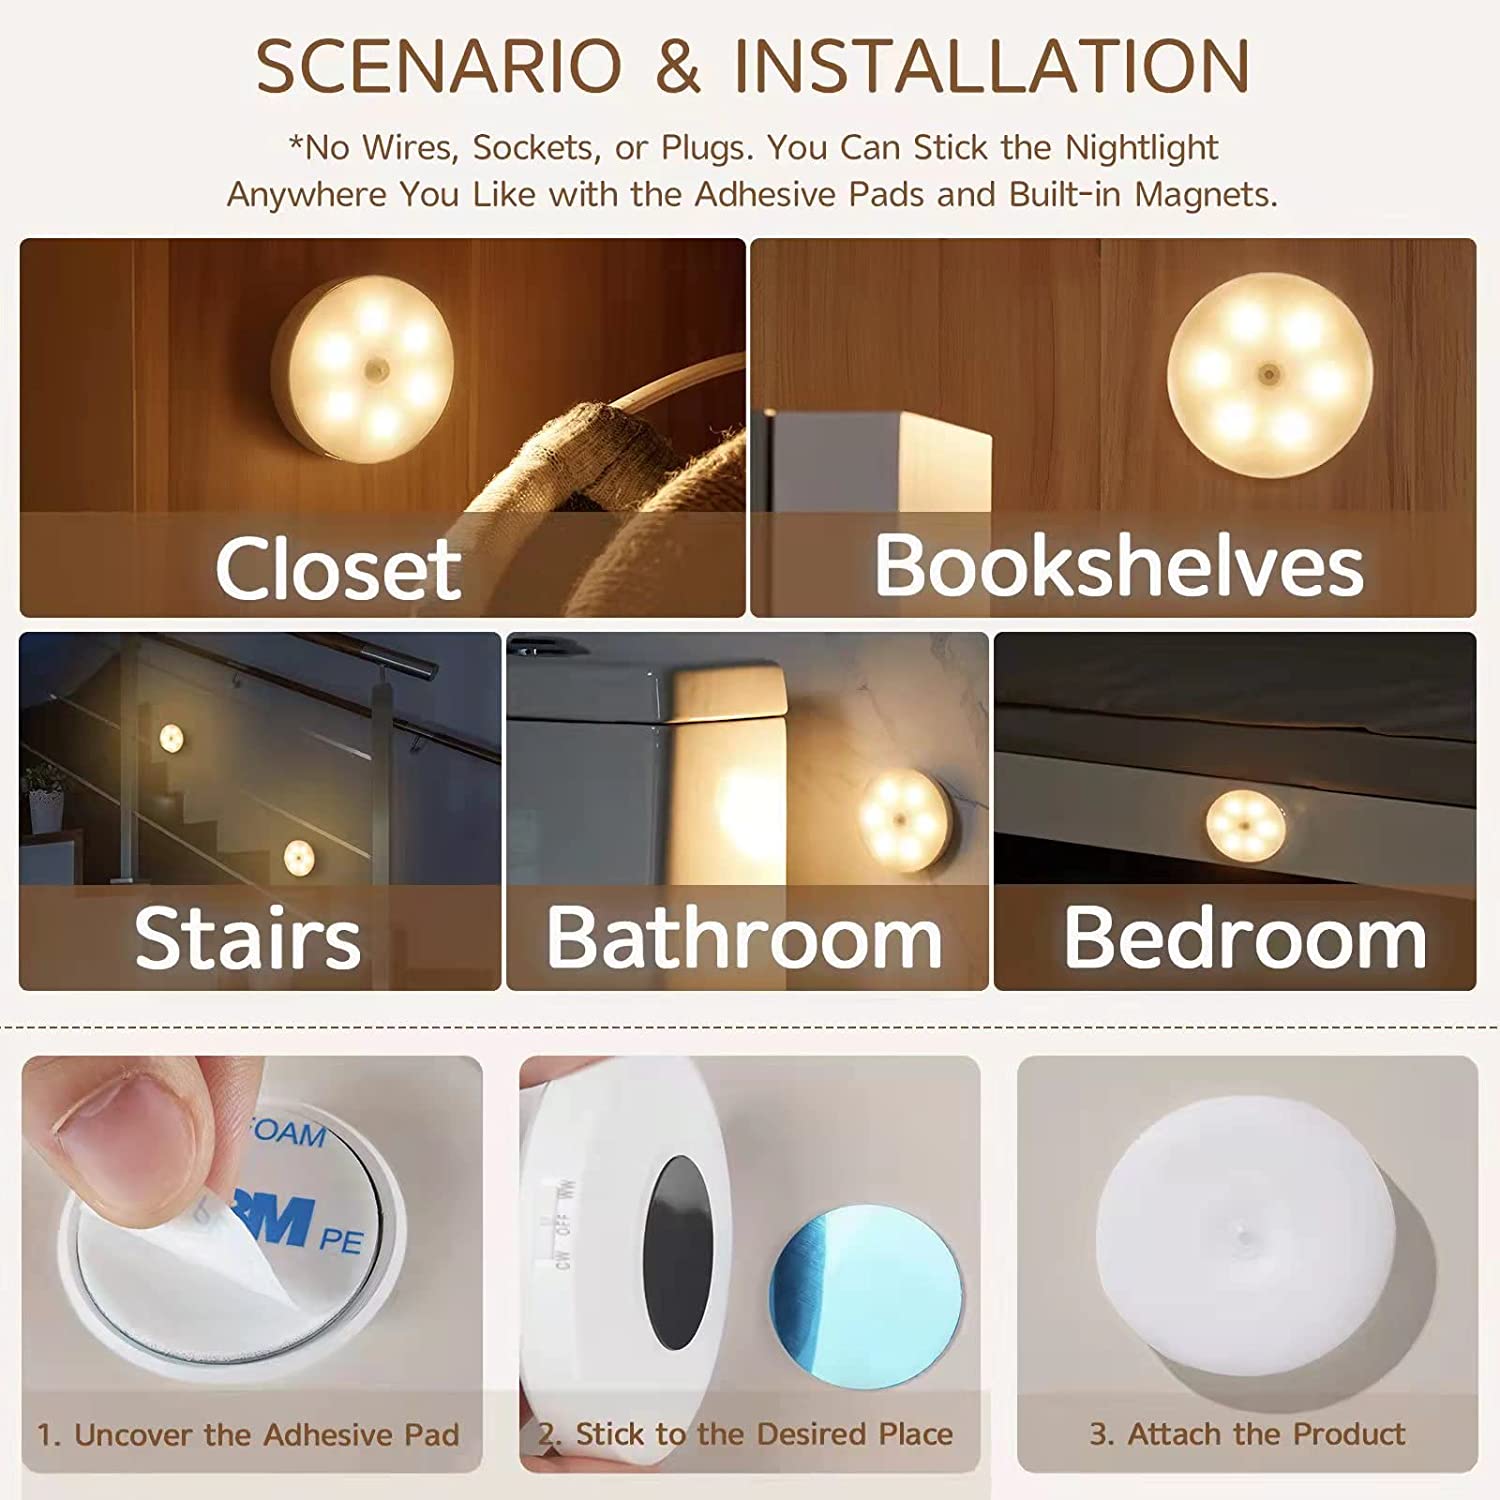 LED-Desk-Lights-Motion-Sensor-Light-Closet-Lights-Night-Light-Rechargeable-Cordless-Wall-Lights-Magnetic-attraction-Stick-on-anywhere-Automatically-turn-on-off-67